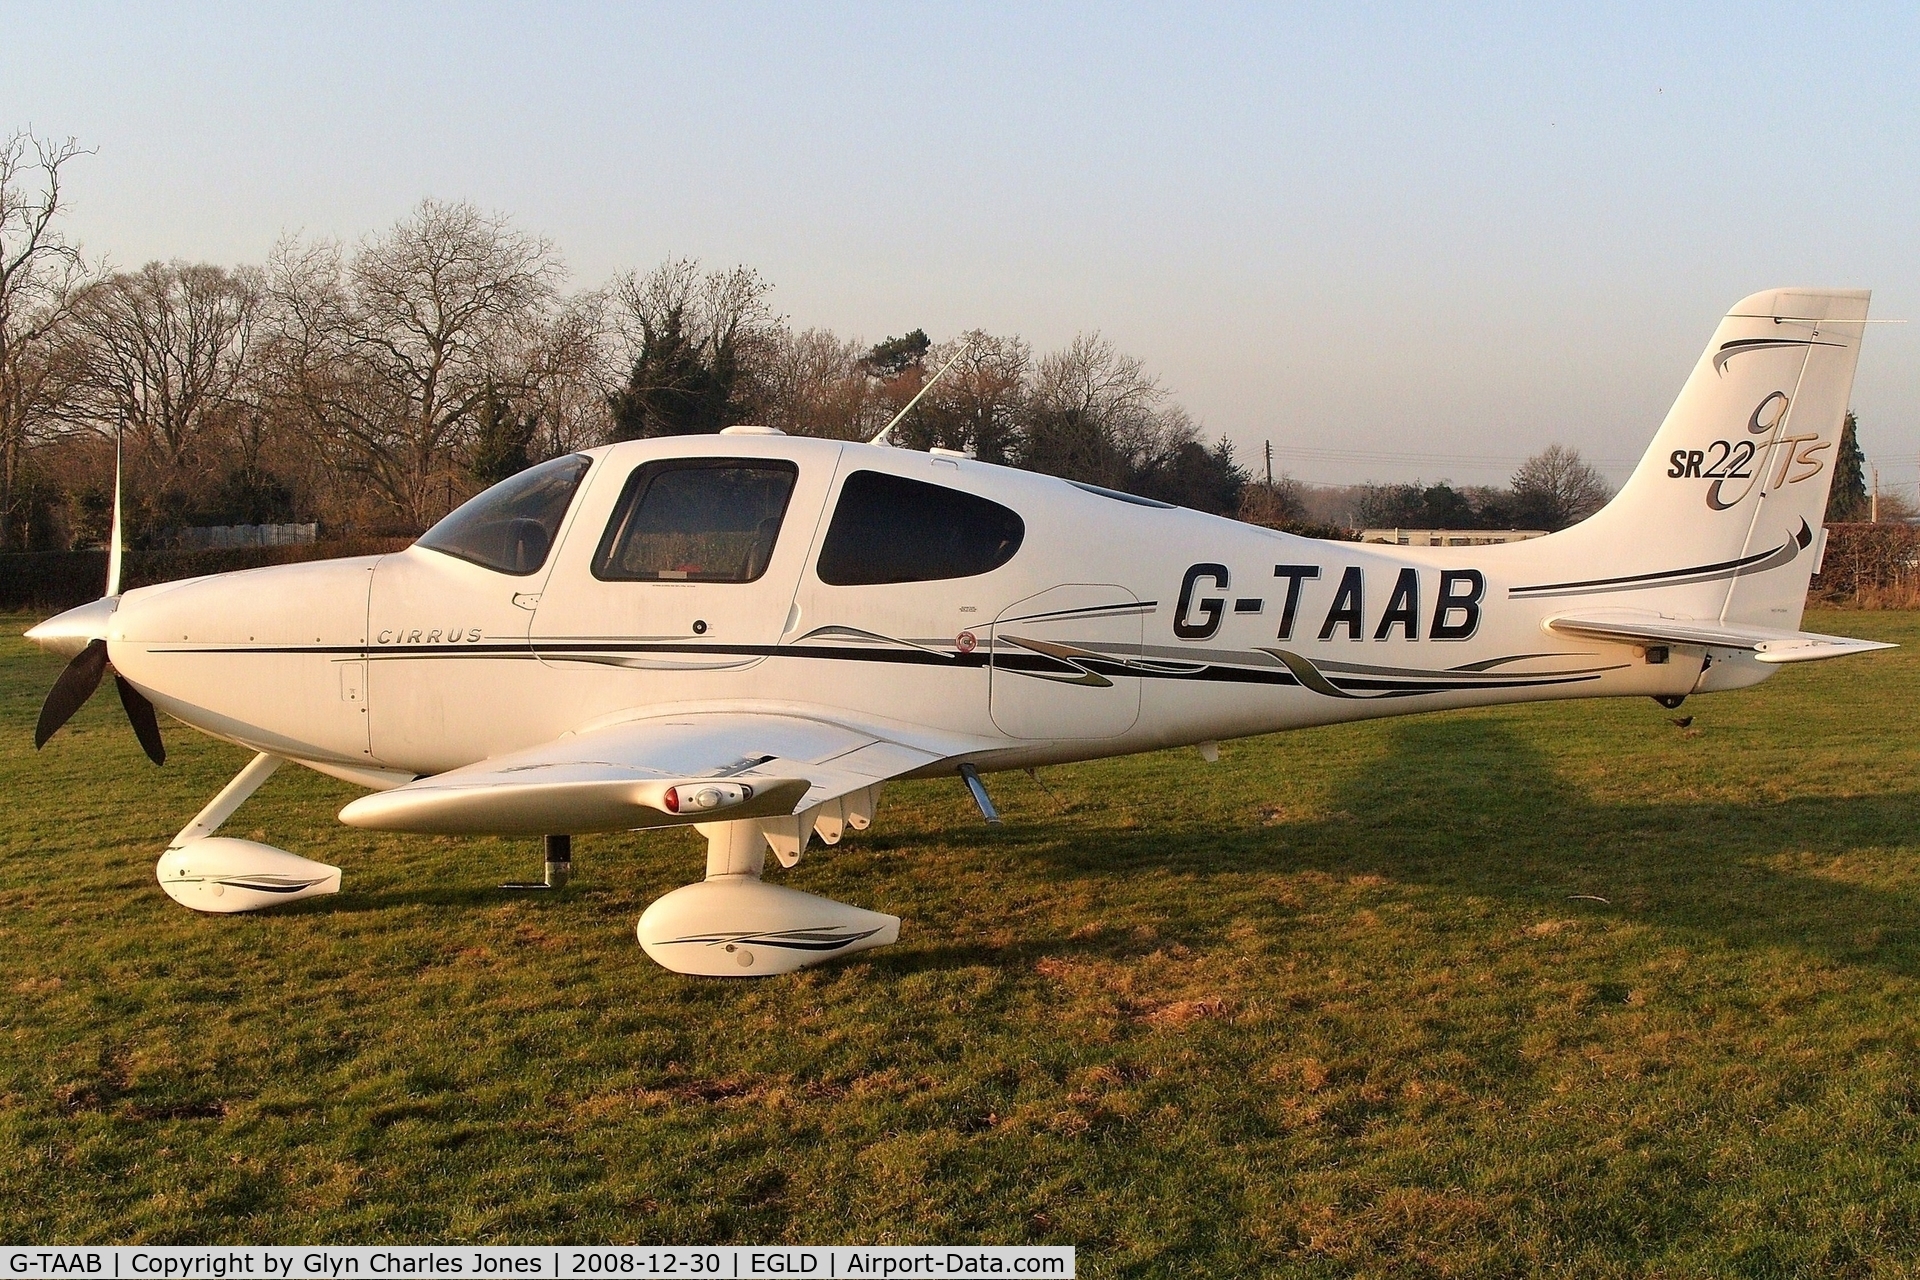 G-TAAB, 2006 Cirrus SR22 GTS C/N 1769, Previously N944CD. Owned by TAA UK Ltd. With thanks to The Pilot Centre.